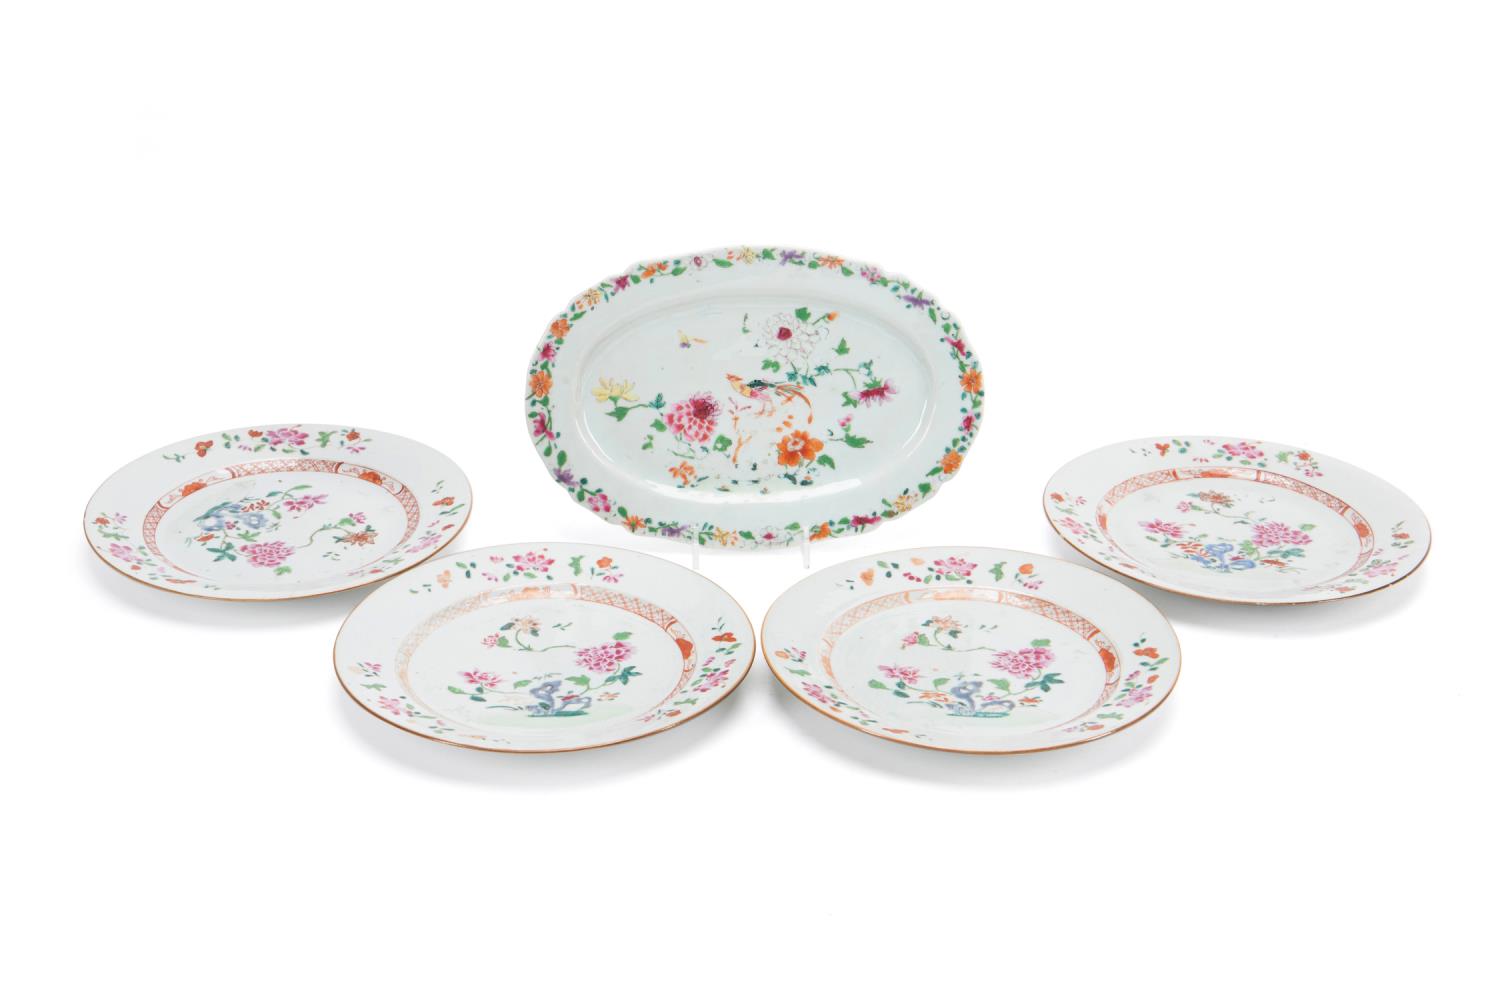 FIVE PIECES FAMILLE ROSE CHINESE